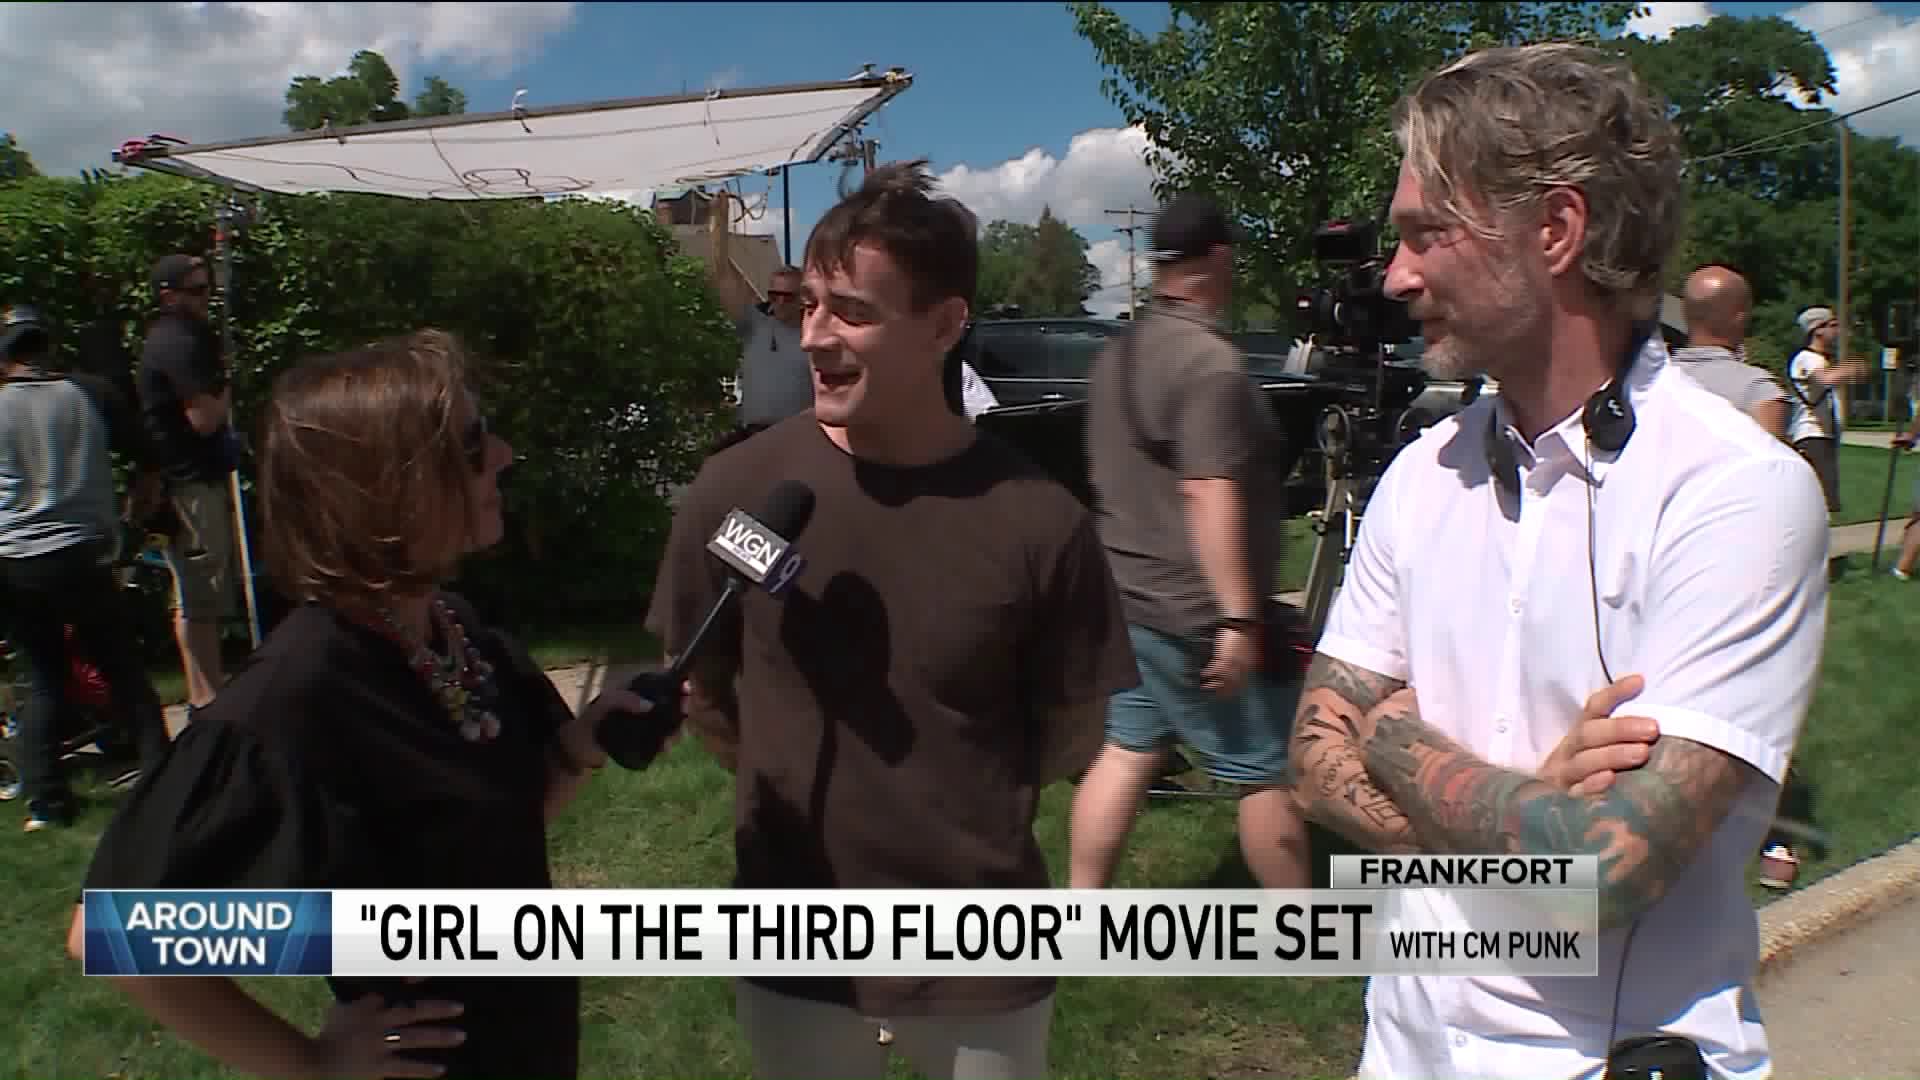 Around Town goes on set of CM Punk’s new movie, ‘Girl on the Third Floor’